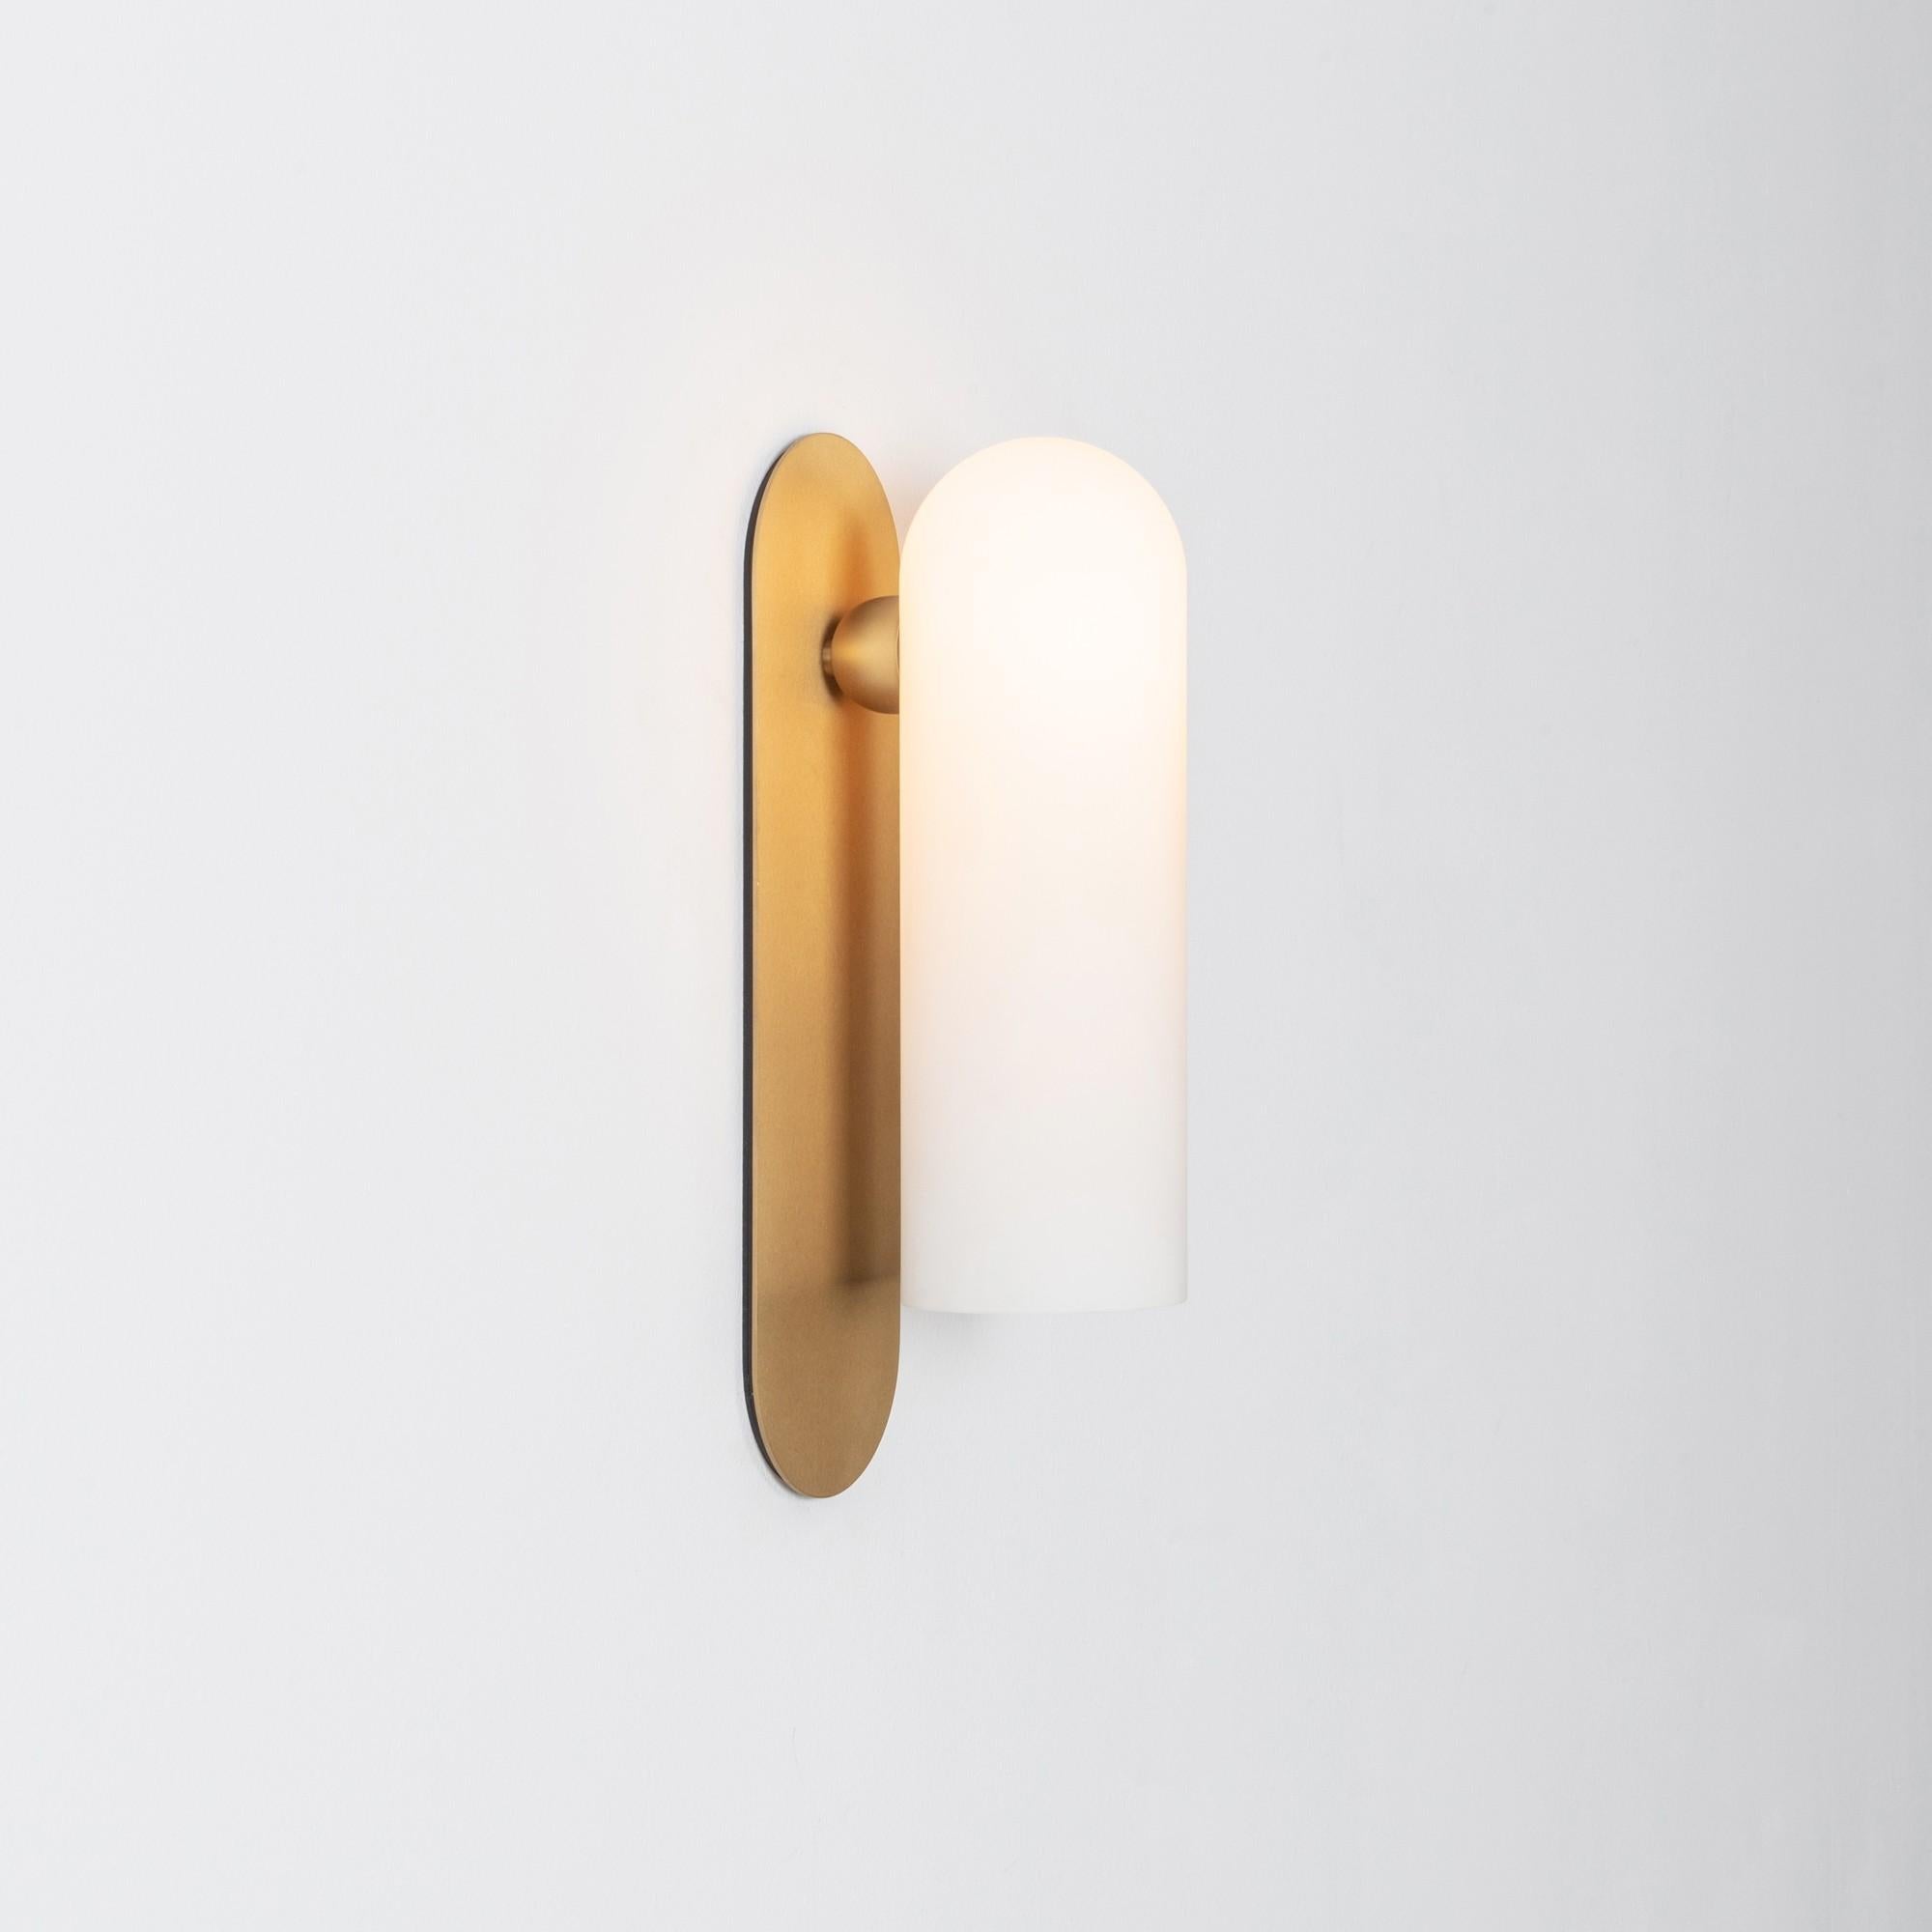 Brass large sconce by Schwung
Dimensions: W 10.5 x D 14 x H 38 cm
Materials: Brass, frosted glass

Finishes available: Black gunmetal, polished nickel, brass

Schwung is a German word, and loosely defined, means energy or momentumm of a